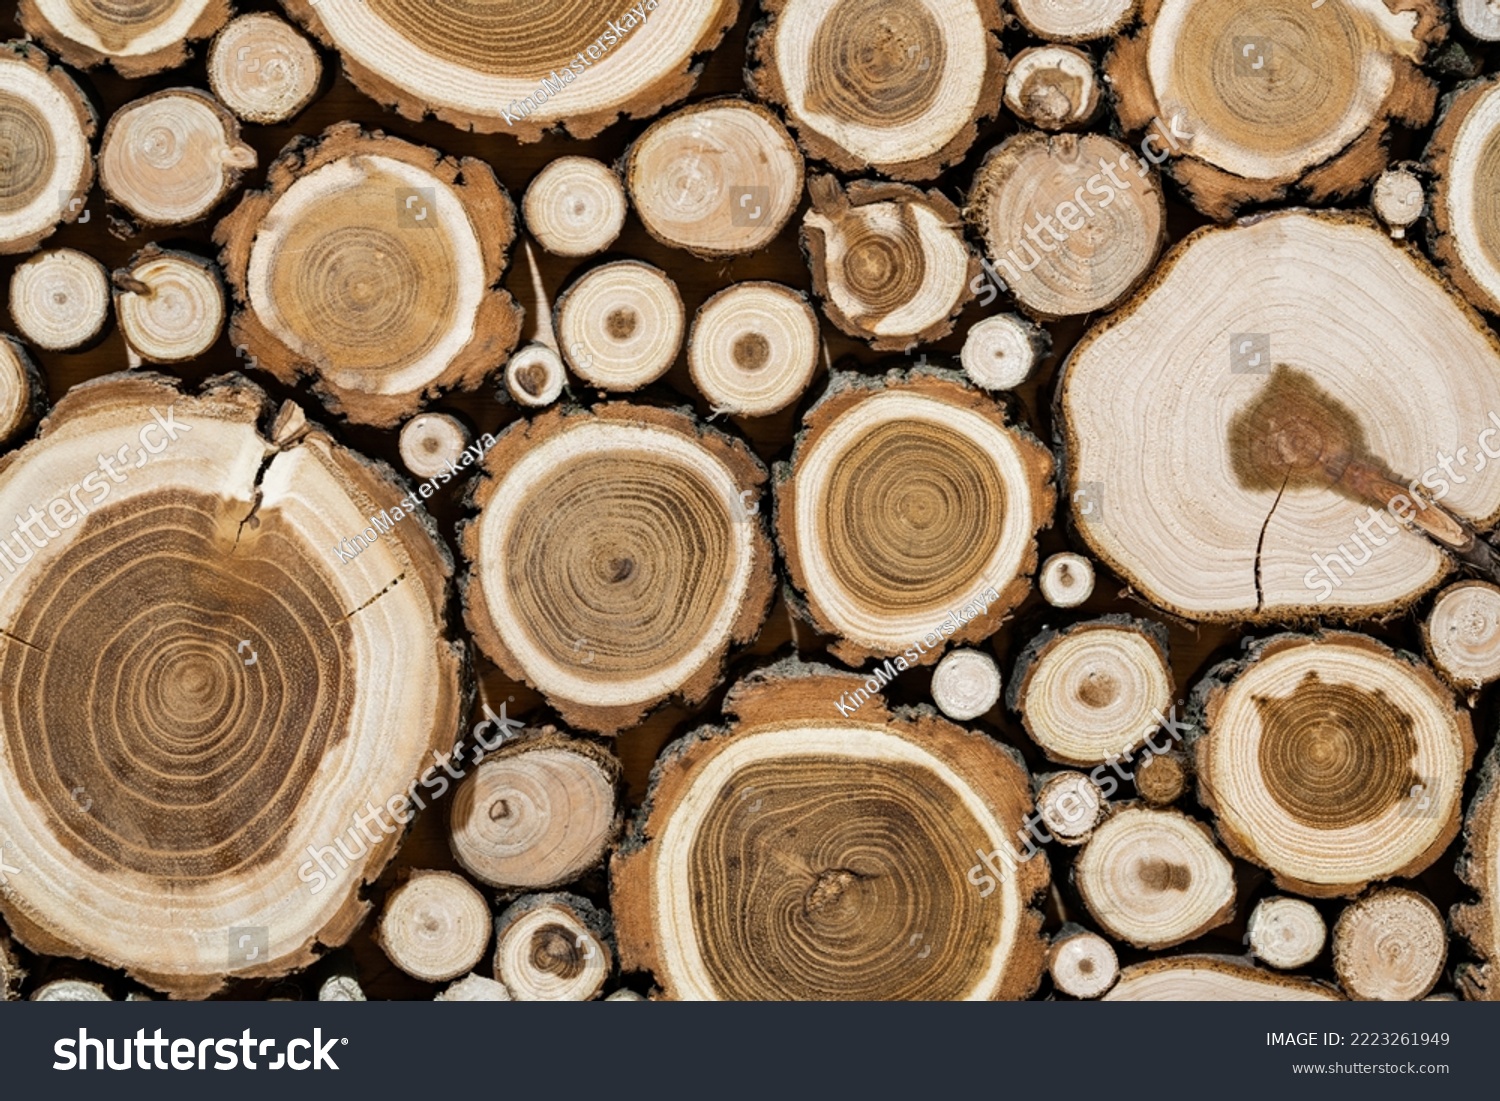 Background of cross section of round cut logs of various sizes. Wall of cut brown logs with bark, cracks and texture of tree rings. Cut tree trunk. Firewood, stumps, lumber. Wooden background pattern. #2223261949